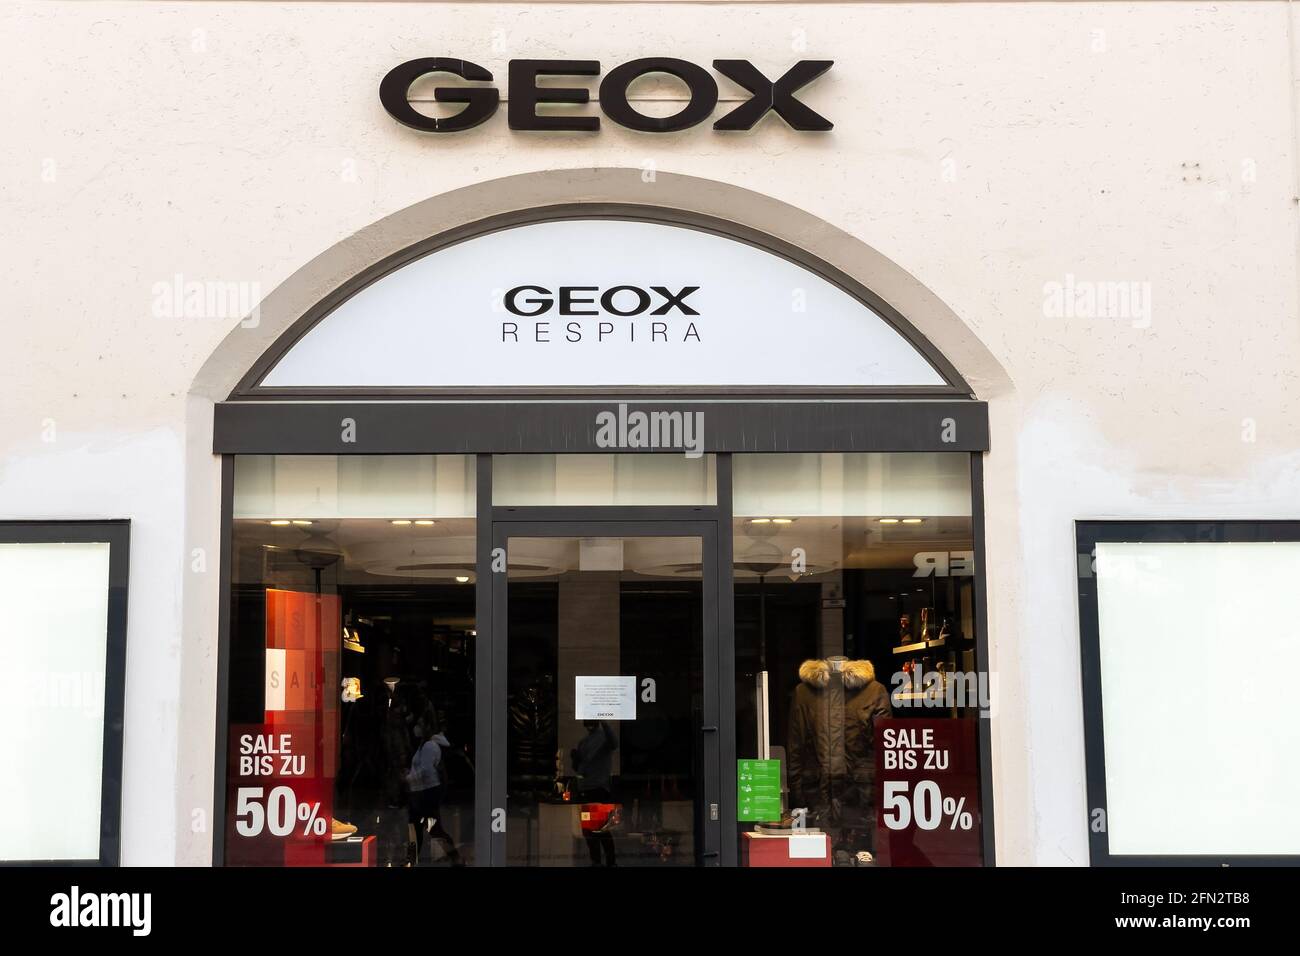 Geox hi-res photography and images - Alamy